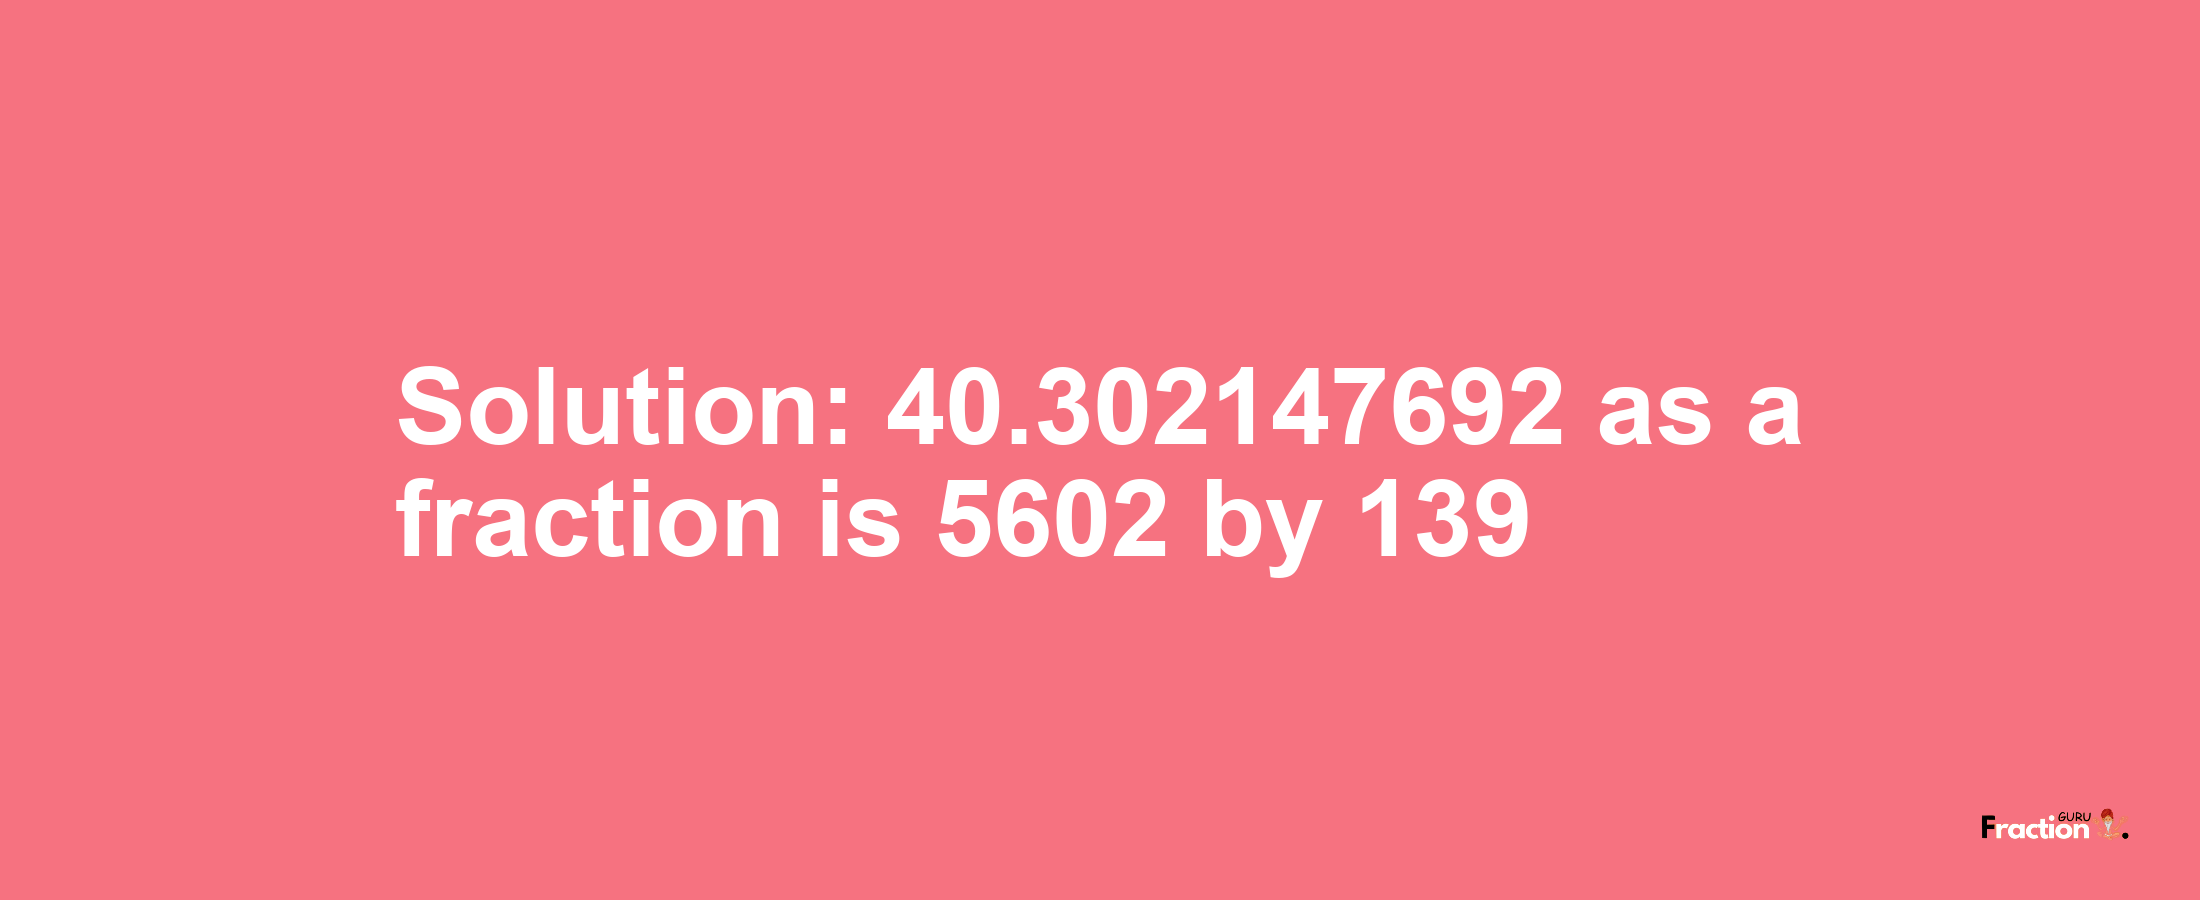 Solution:40.302147692 as a fraction is 5602/139